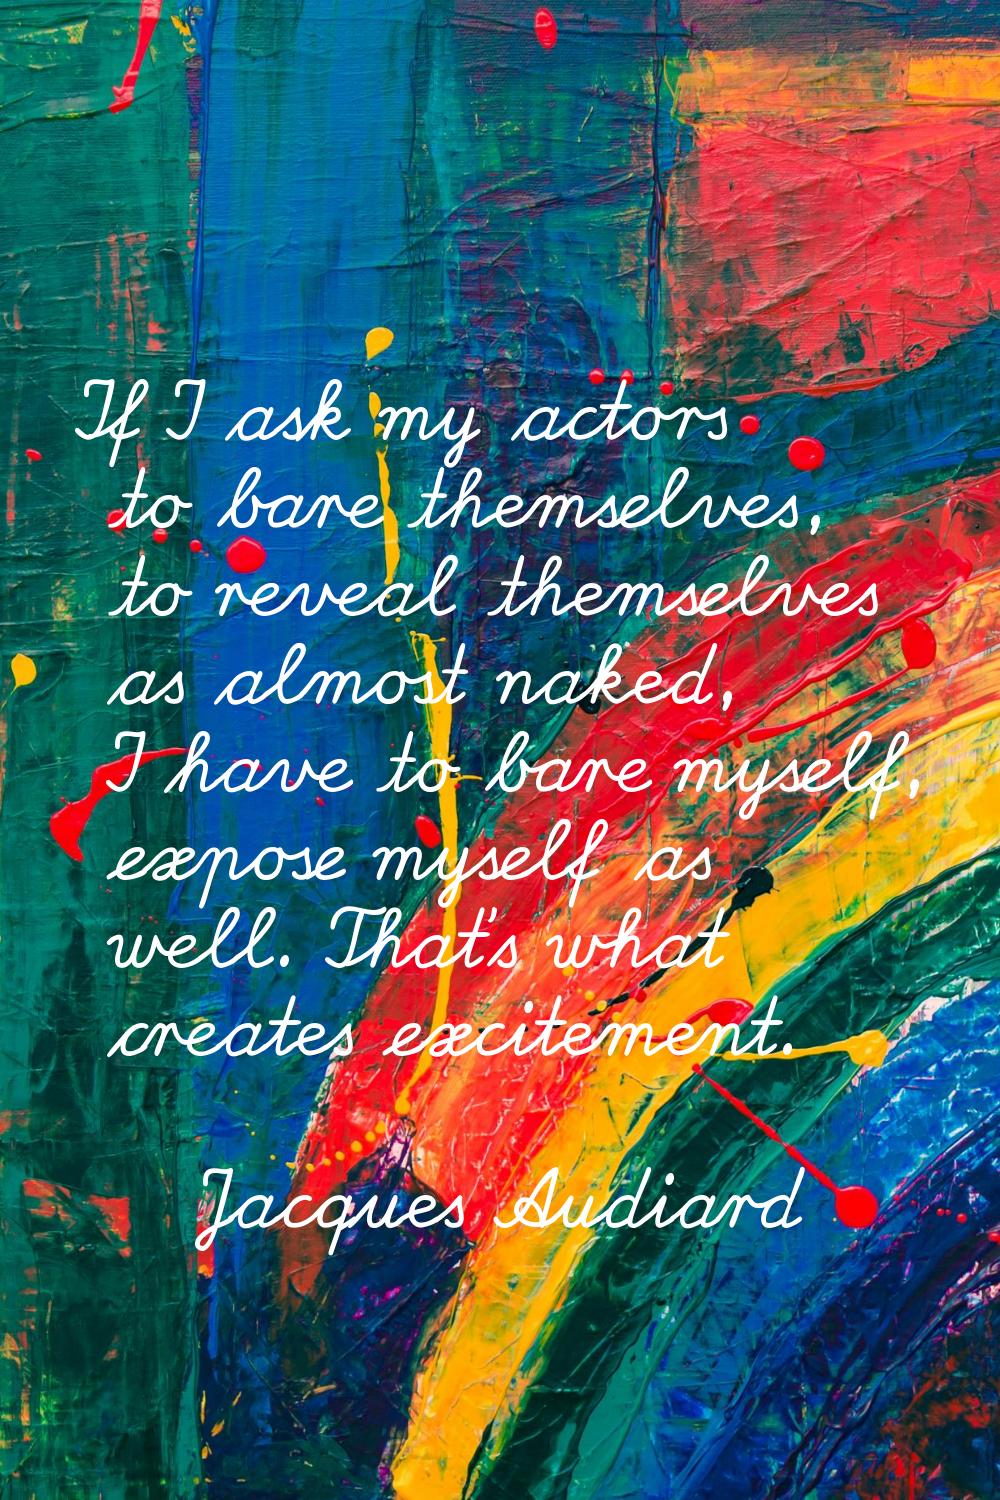 If I ask my actors to bare themselves, to reveal themselves as almost naked, I have to bare myself,